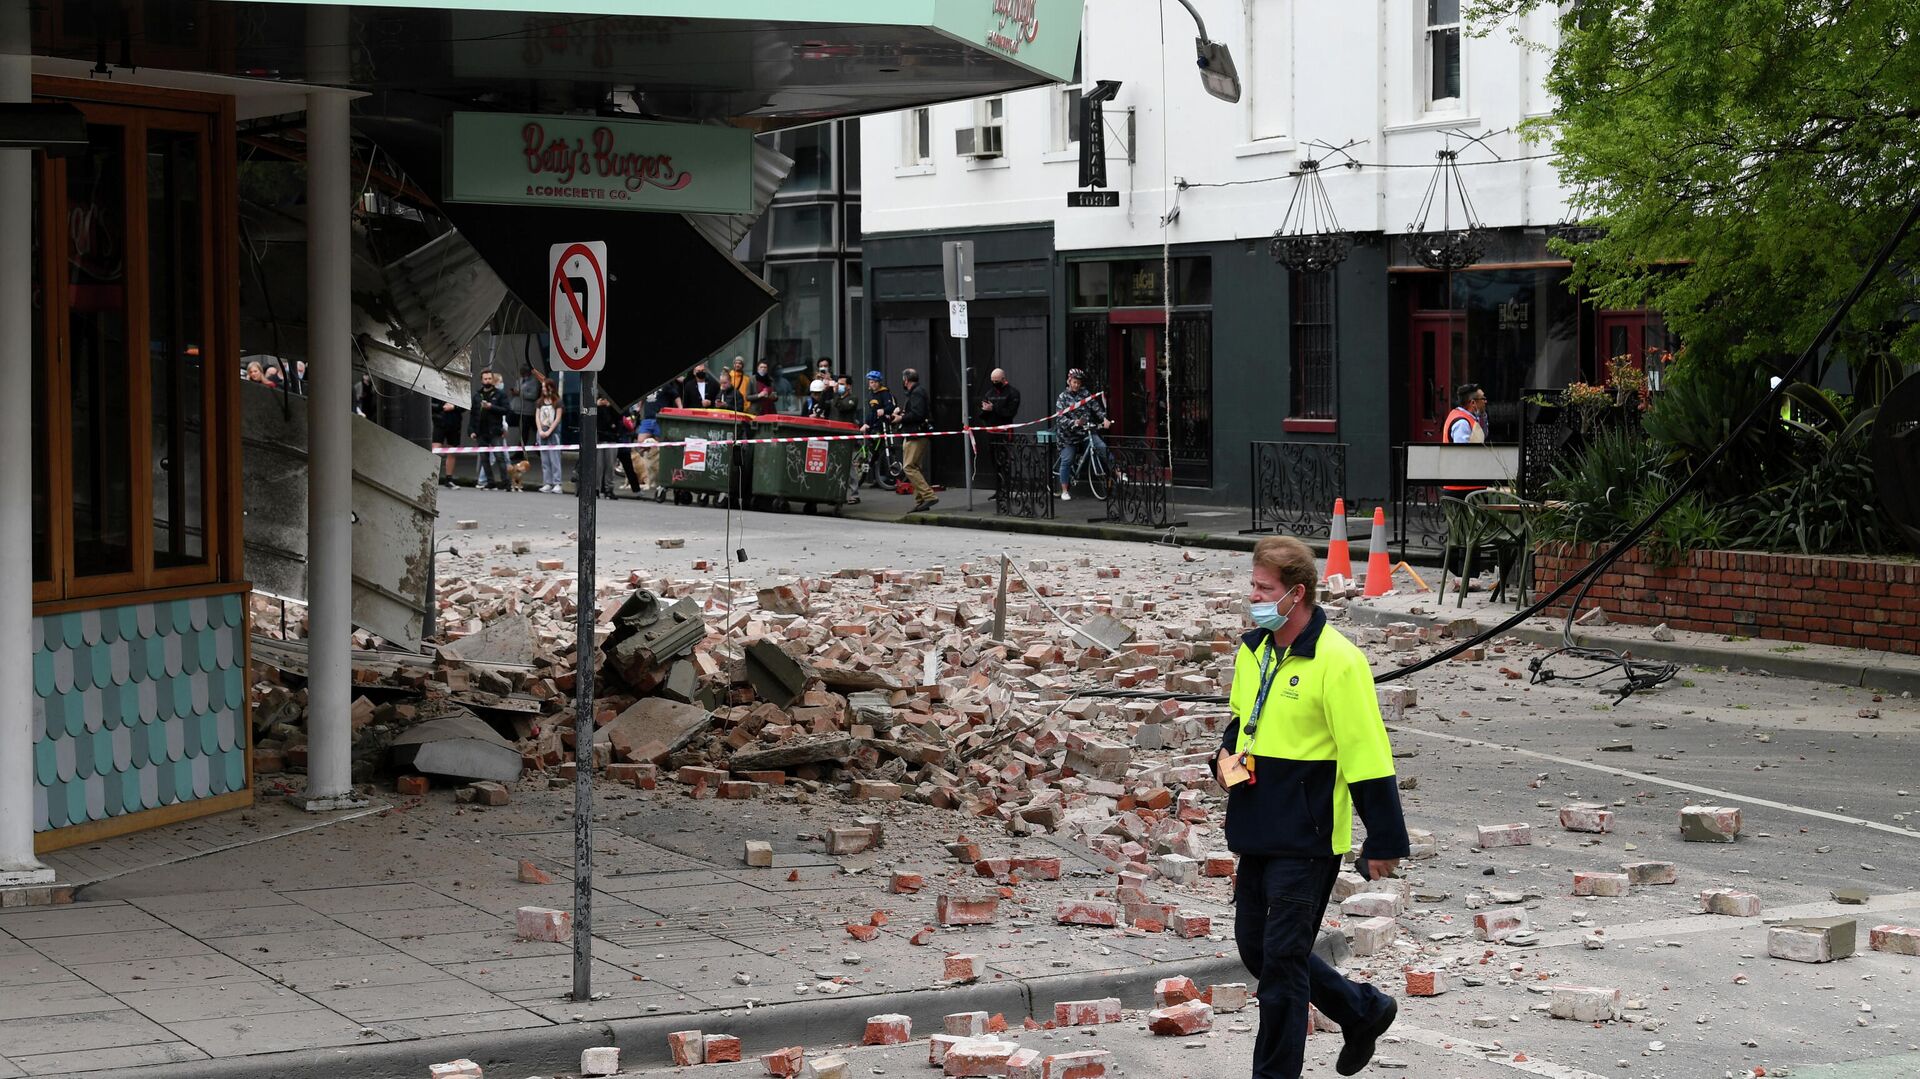 A person walks past damage to the exterior of a restaurant following an earthquake in the Windsor suburb of Melbourne, Australia, September 22, 2021 - Sputnik International, 1920, 22.09.2021